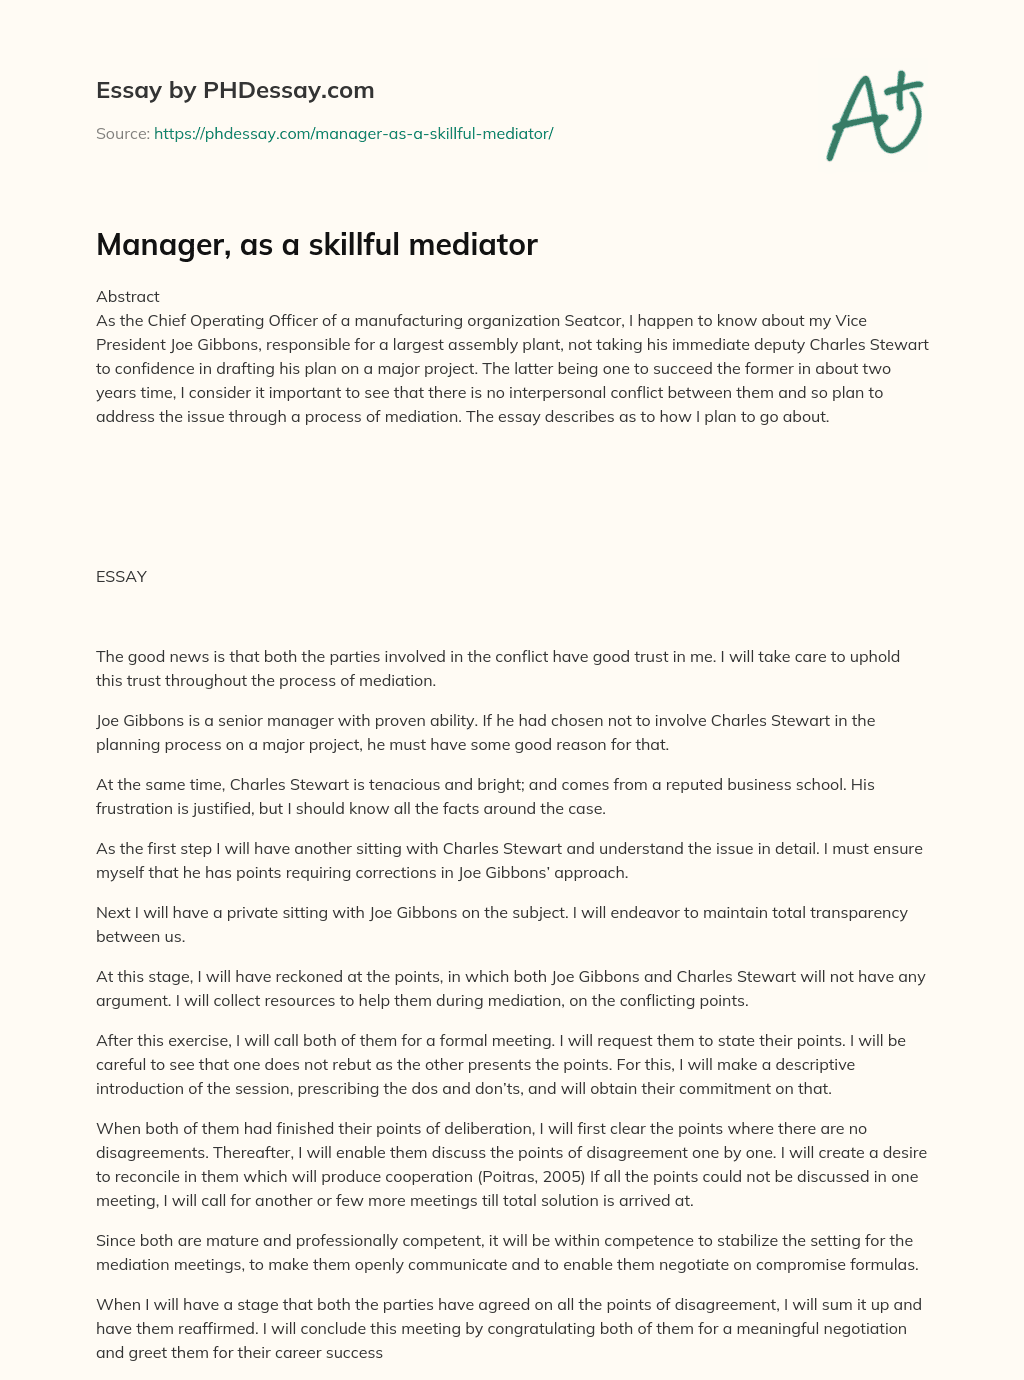 Manager, as a skillful mediator essay